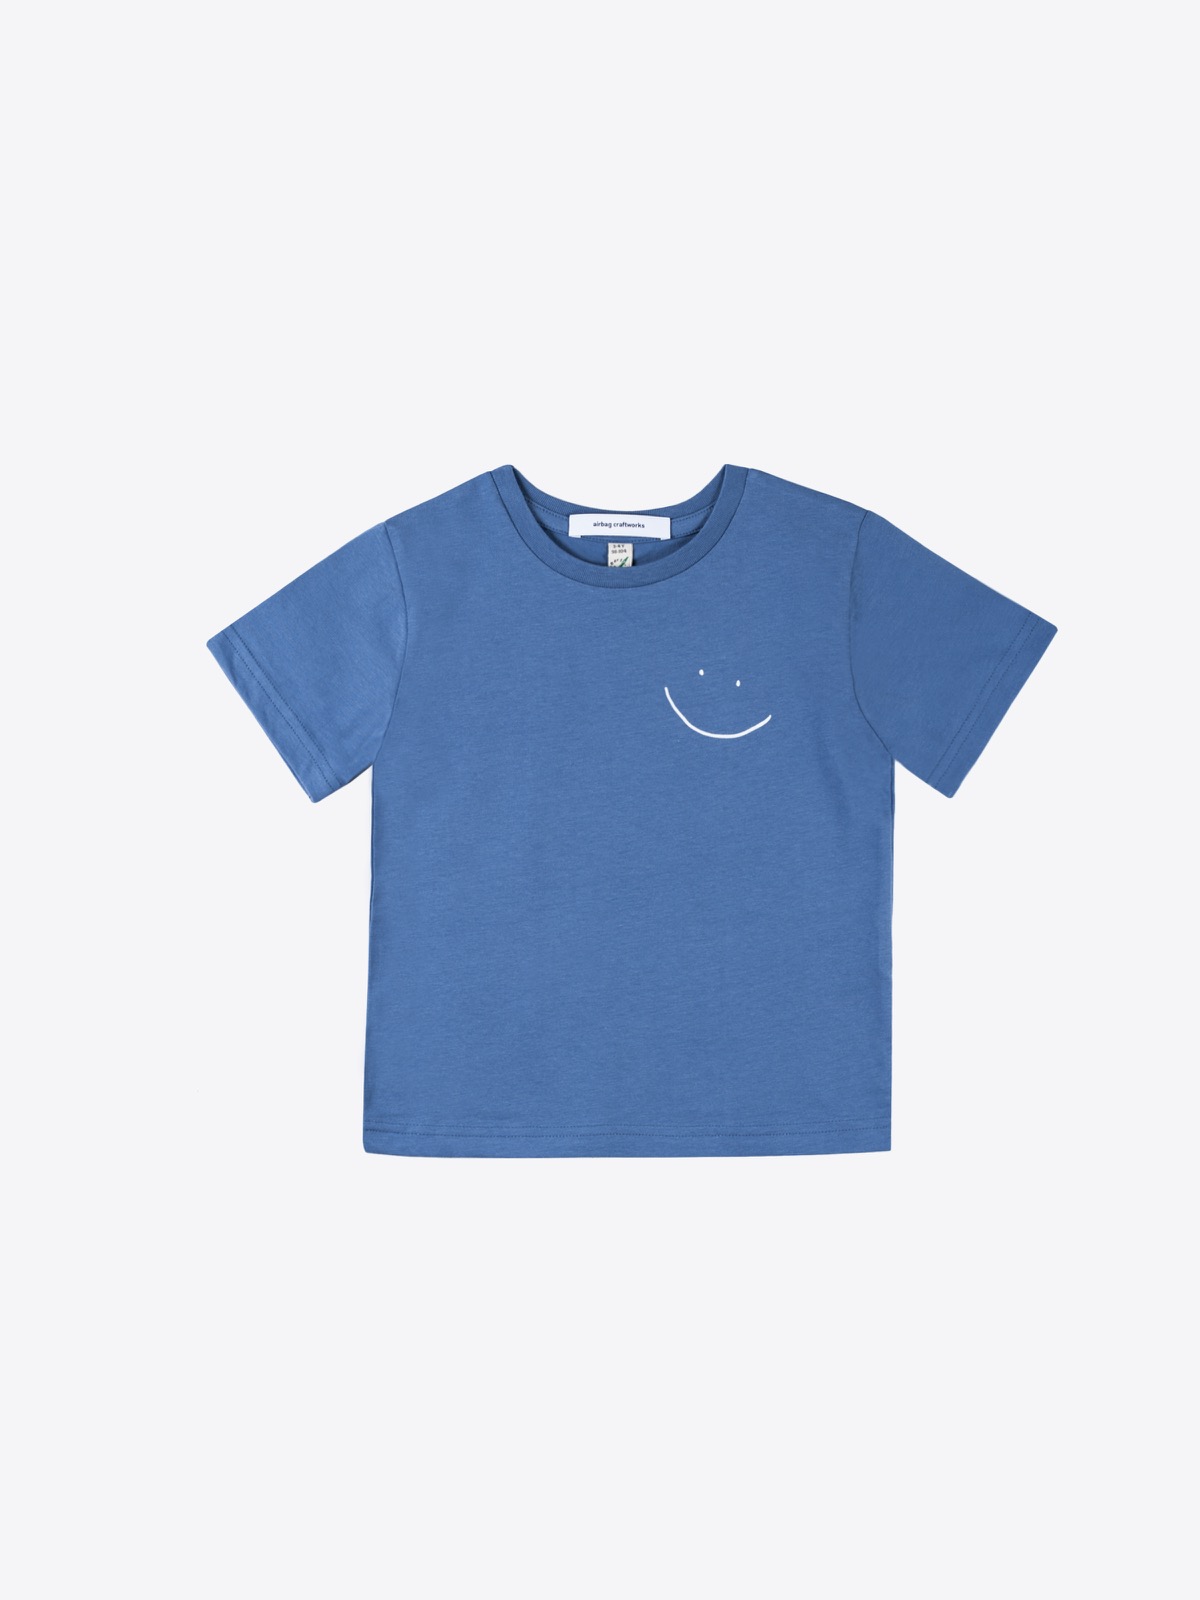 airbag craftworks children t-shirt | simply happy | blue